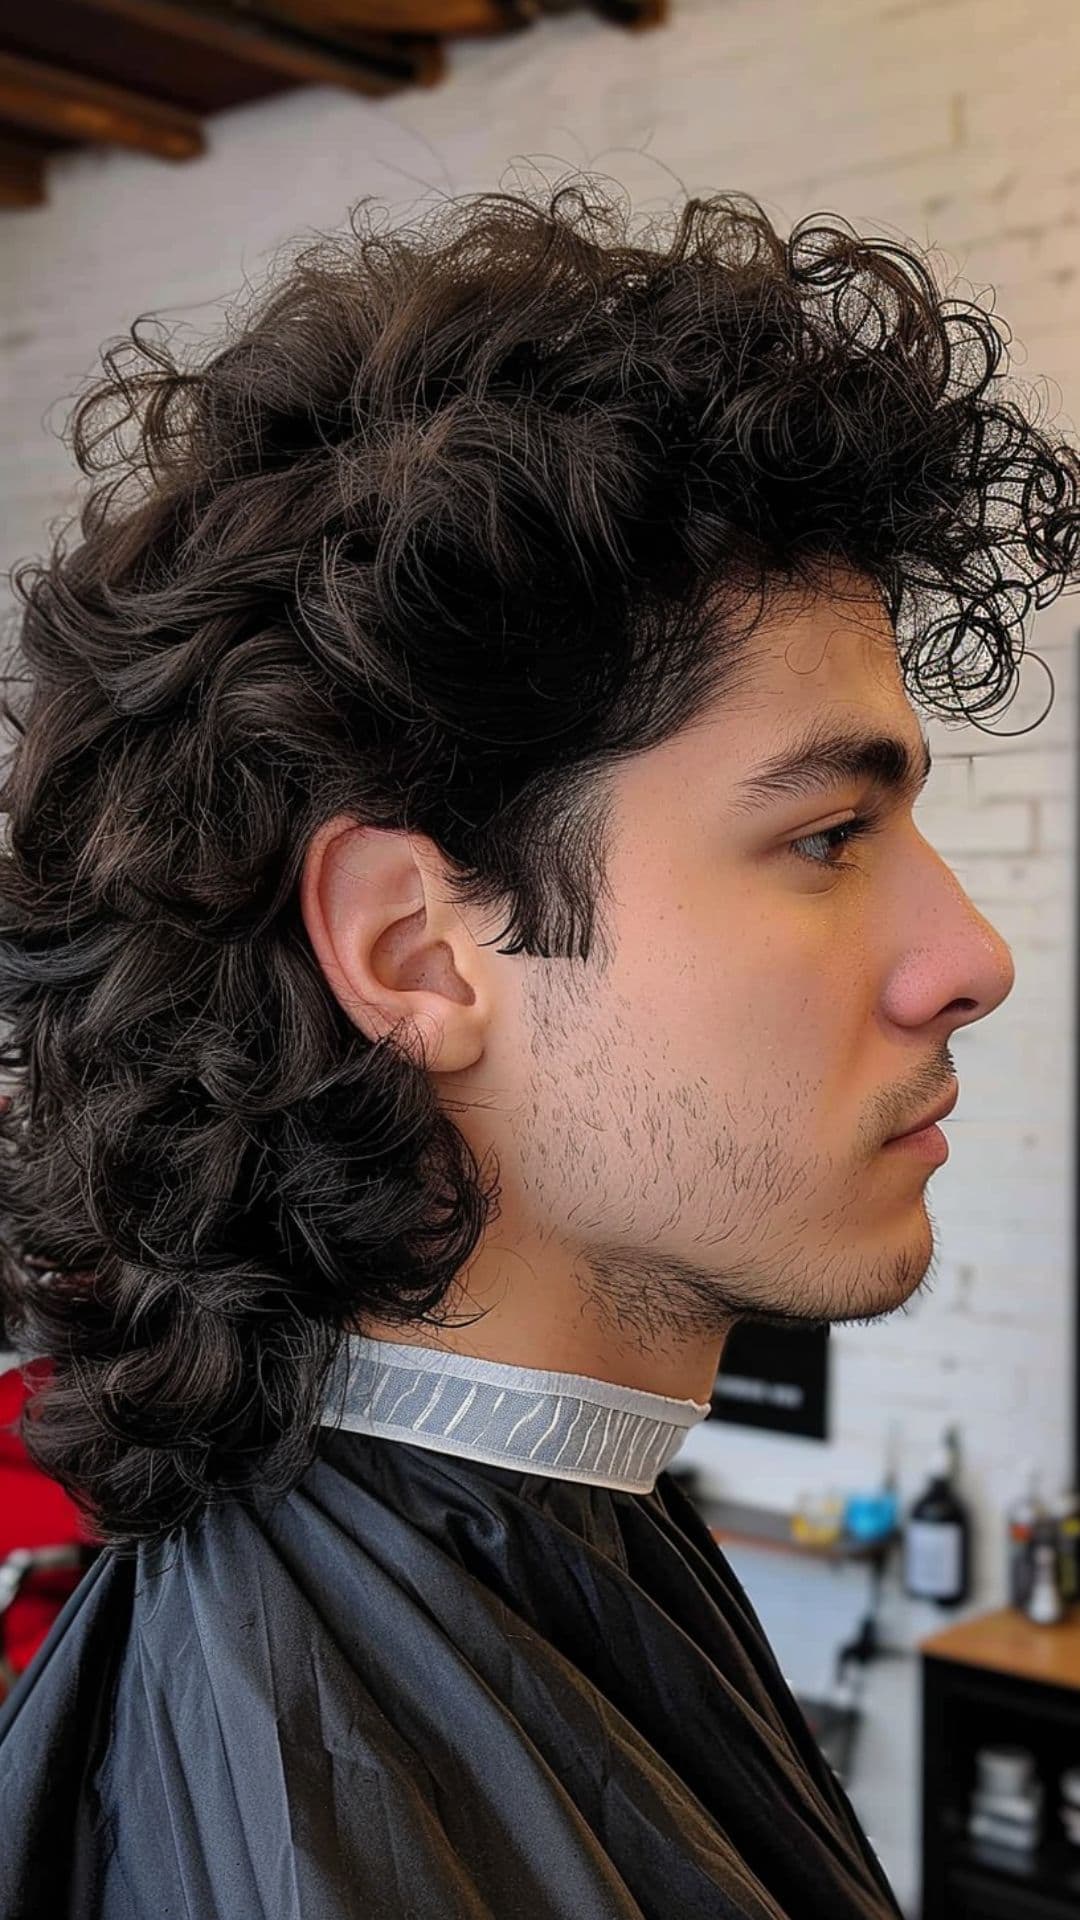 A man modelling a curly mullet hairstyle.